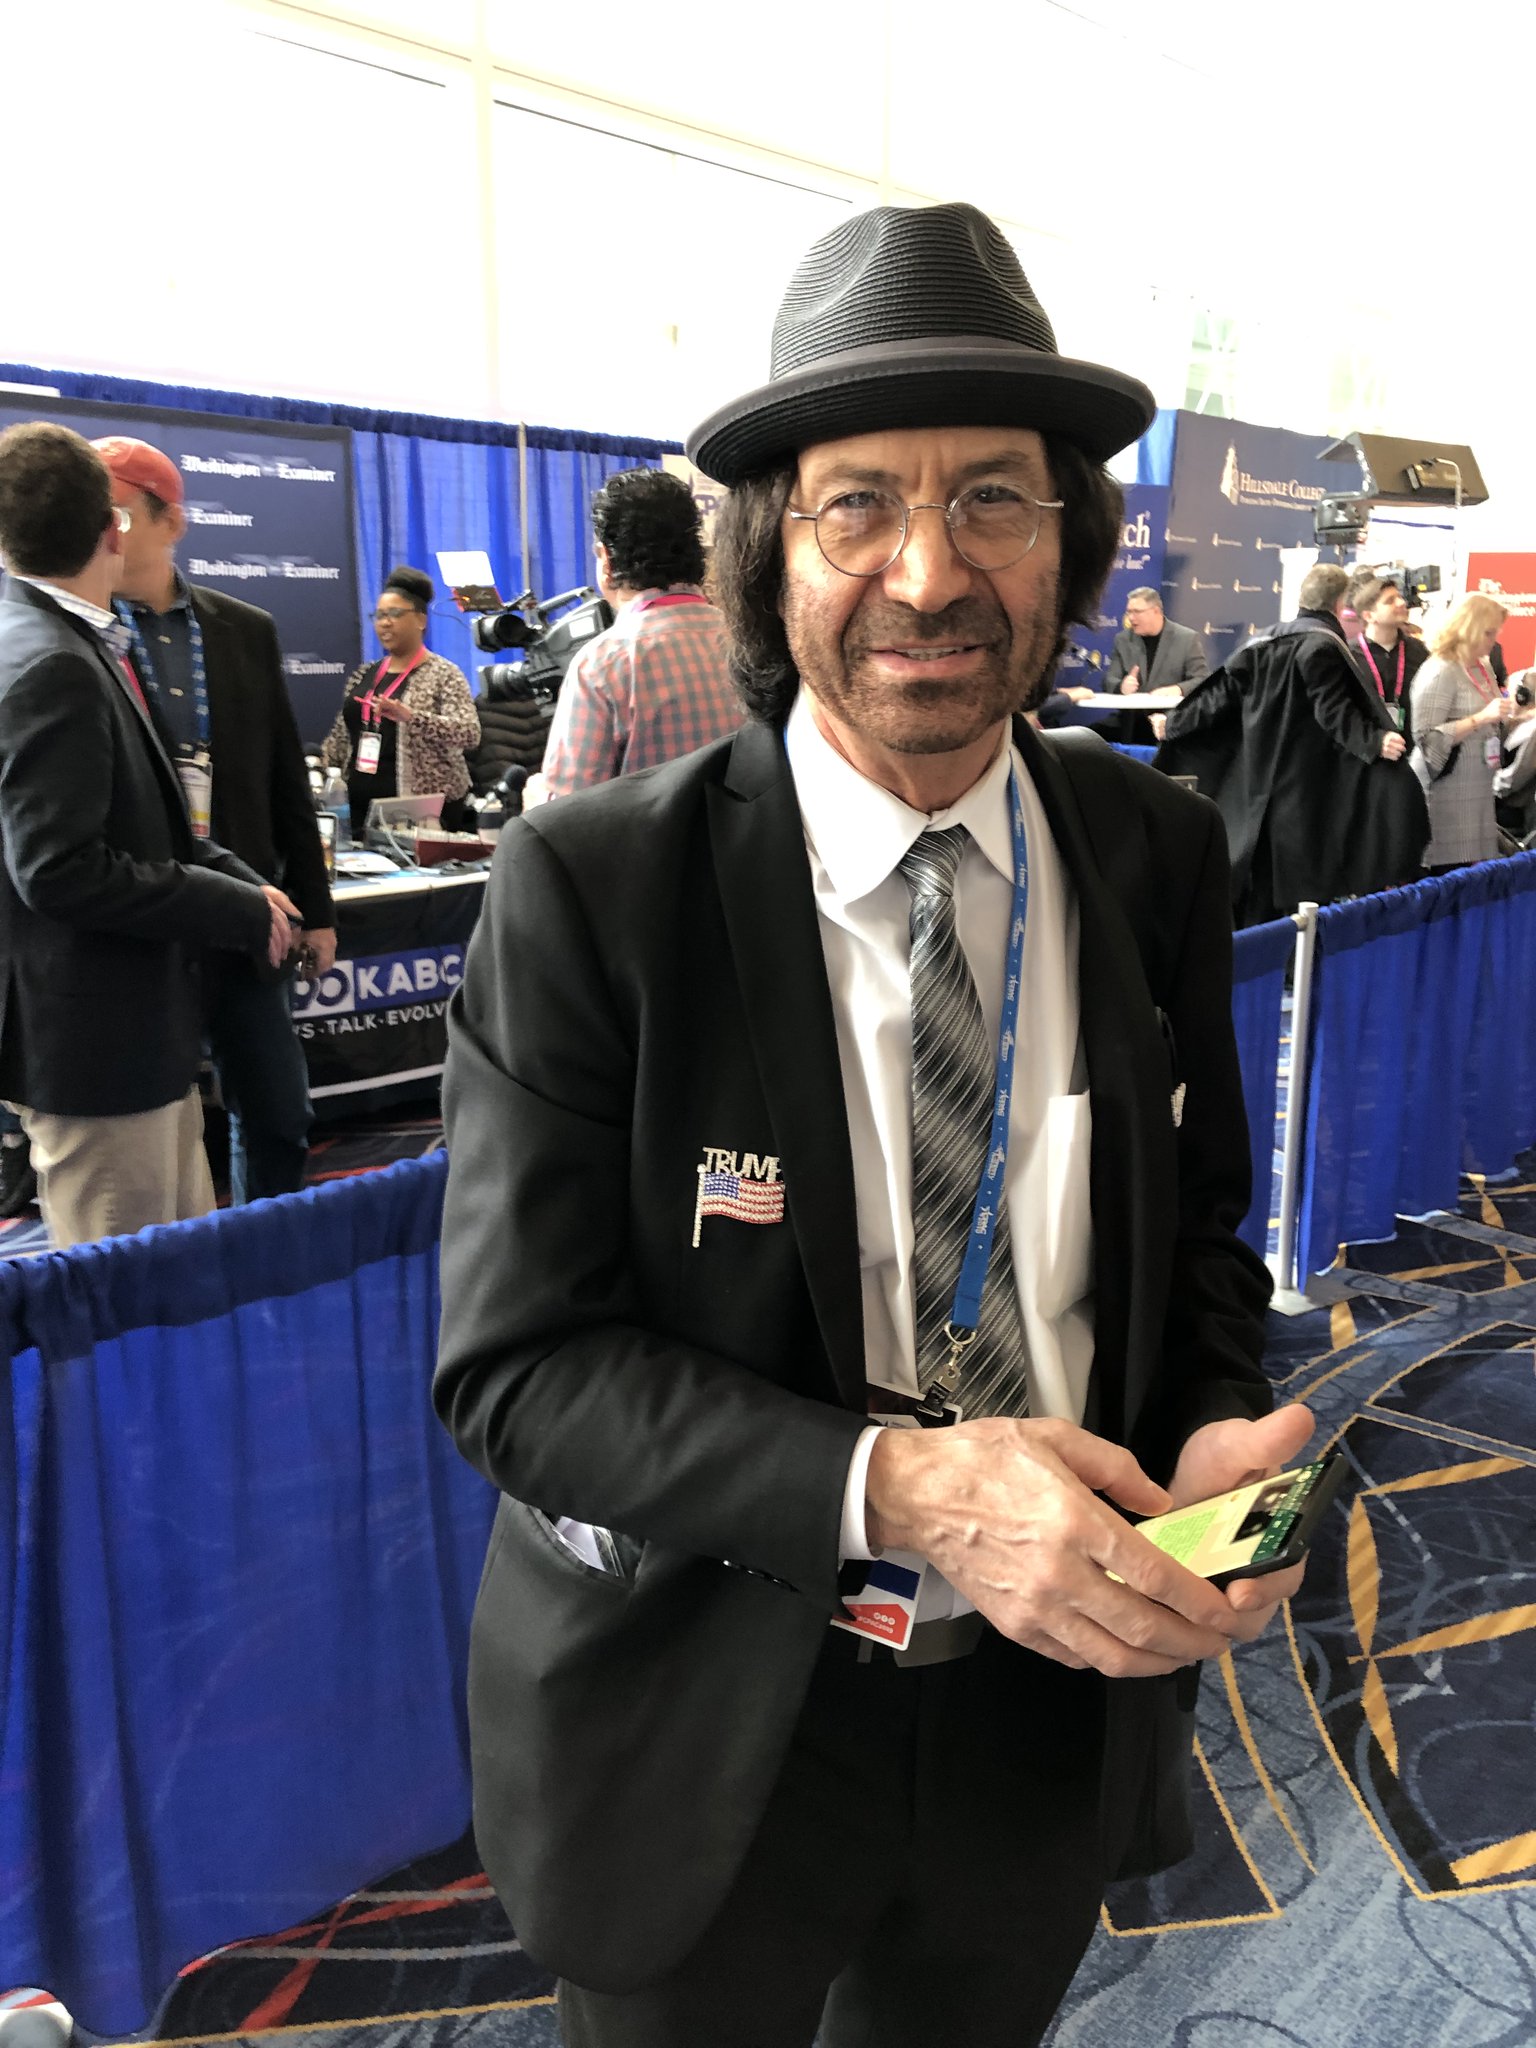 Will Sommer on Twitter: "Vincent Fusca — the guy QAnon believers think is JFK Jr in disguise — is here at CPAC.… "